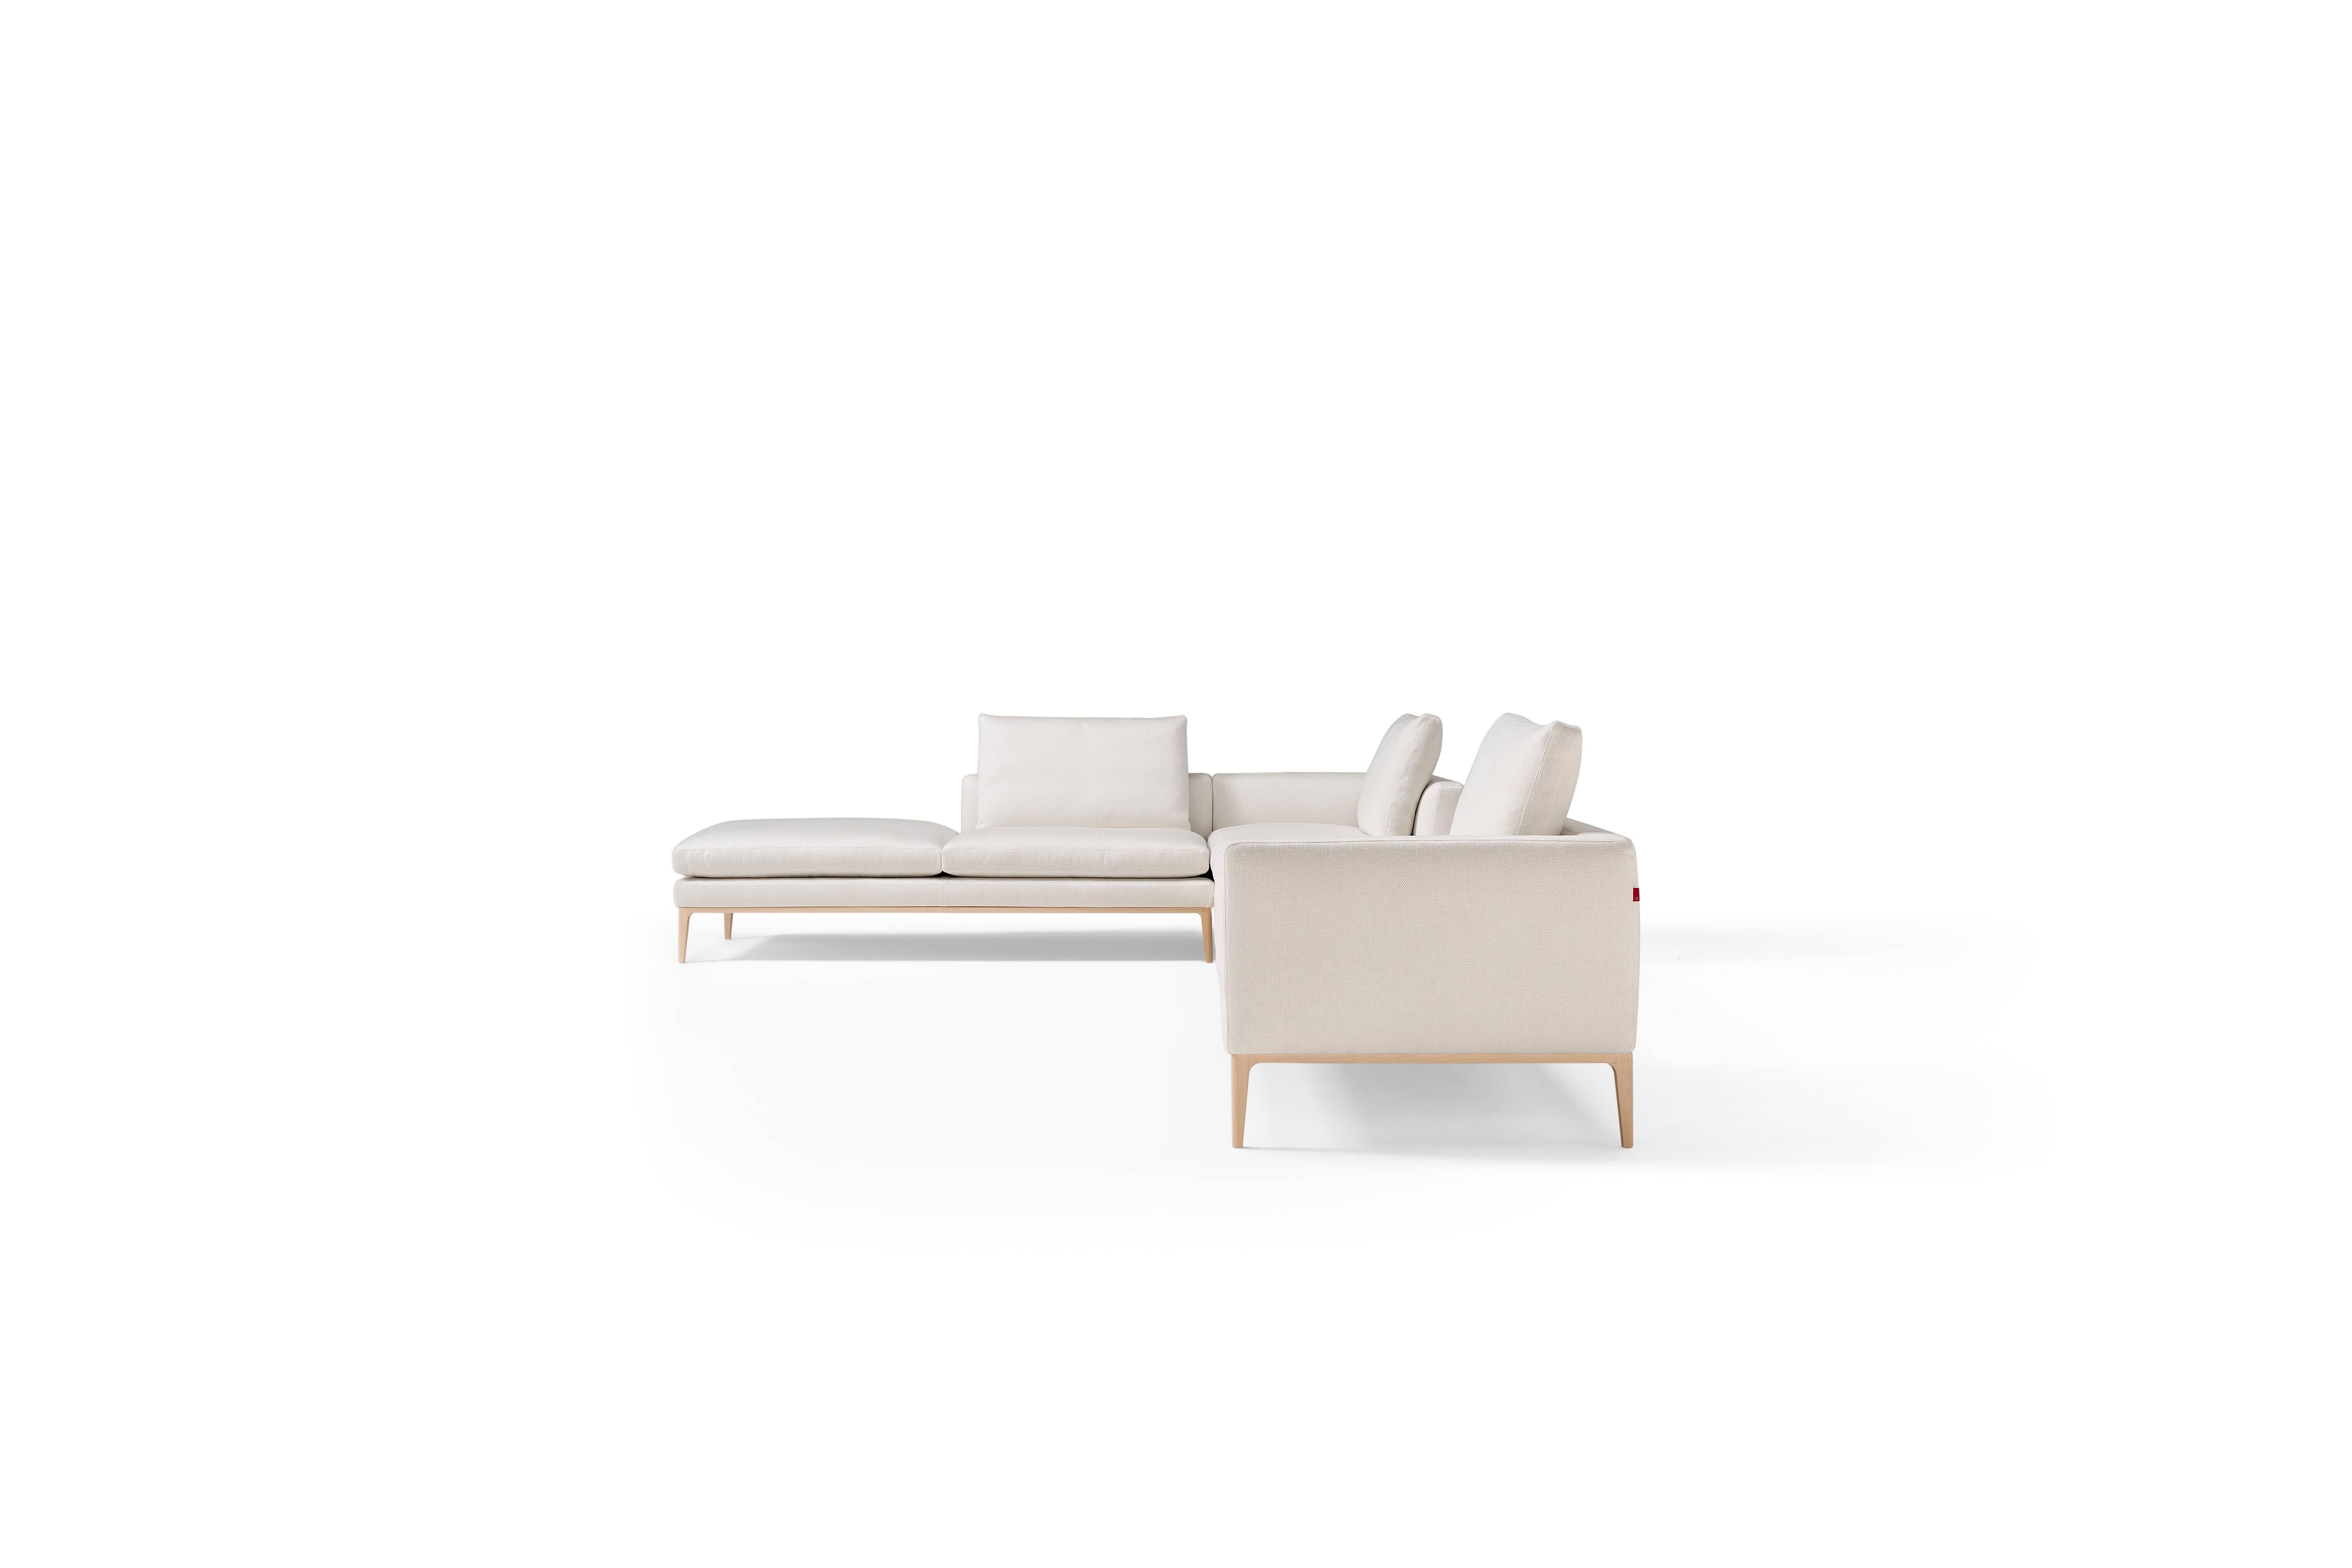 Leonard

Leonard is a seating system created by the aggregation of geometric volumes defined by an elegant silhouette. A continuous line draws the outline of seats, backrests and armrests that can accommodate soft and fluffy pillows. A precise